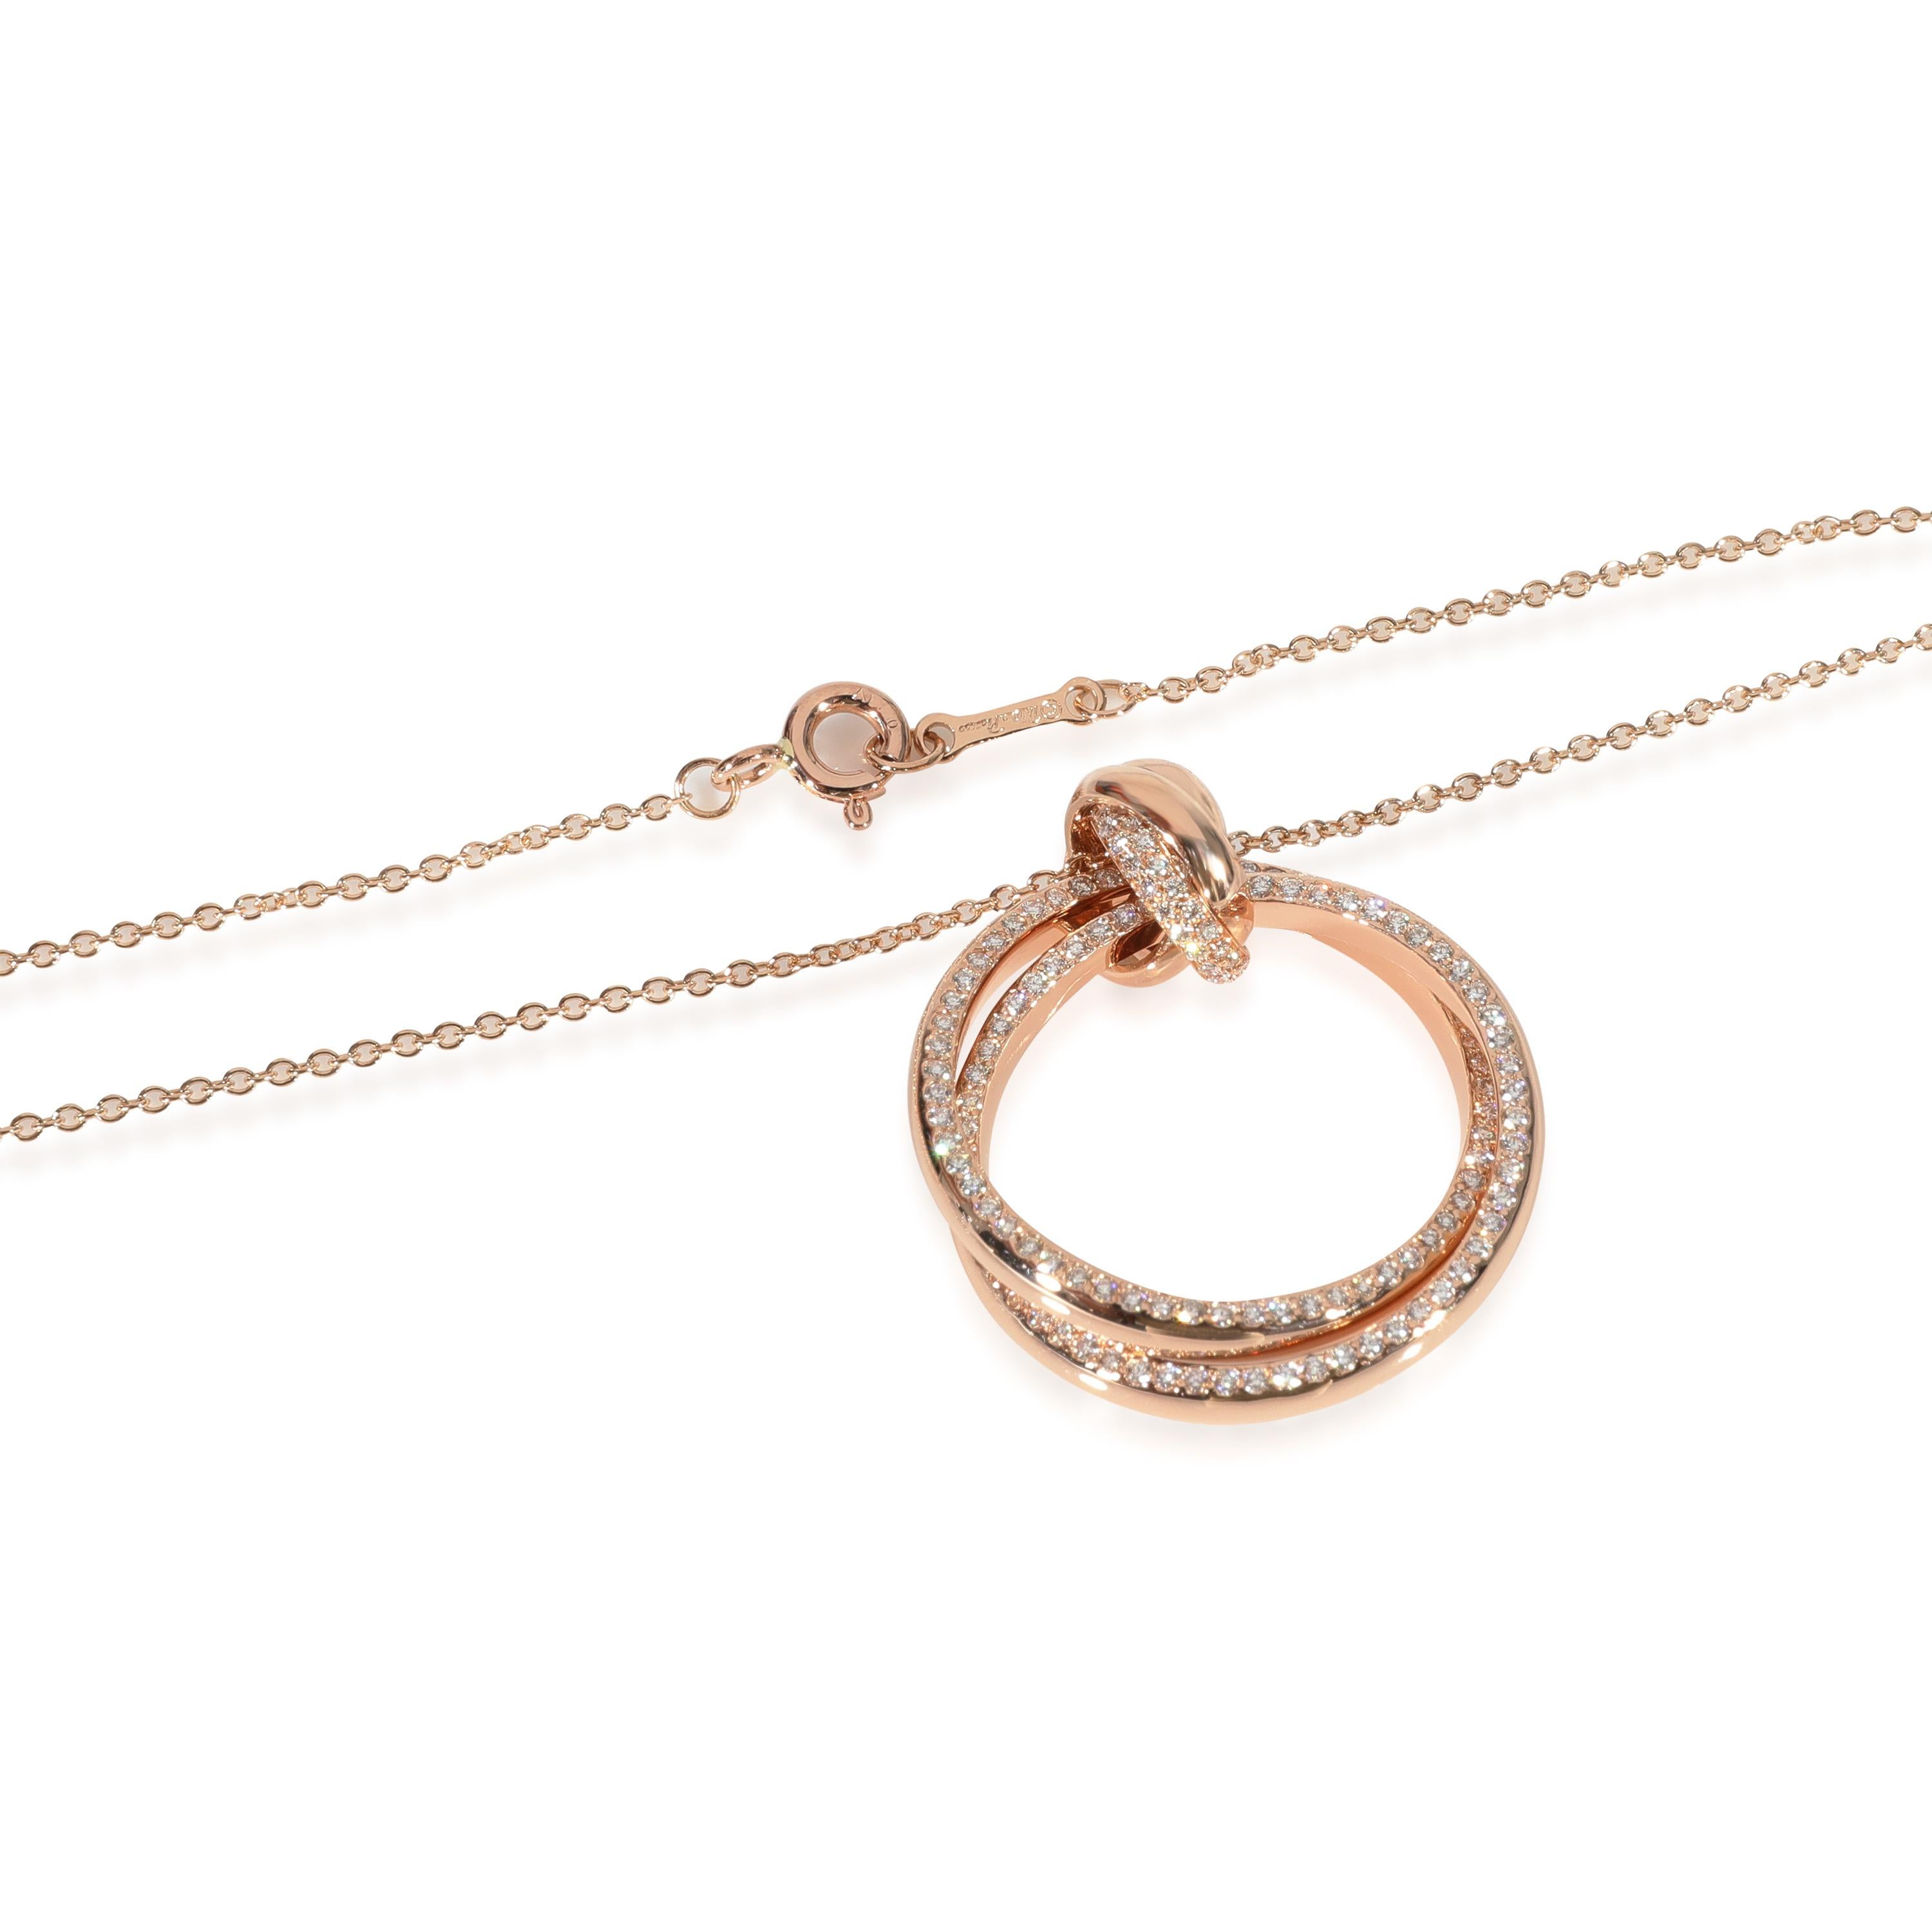 Tiffany & Co. Paloma Picasso Diamond Melody Pendant in 18k Rose Gold 0.40 CTW

PRIMARY DETAILS
SKU: 130831
Listing Title: Tiffany & Co. Paloma Picasso Diamond Melody Pendant in 18k Rose Gold 0.40 CTW
Condition Description: The daughter of artist